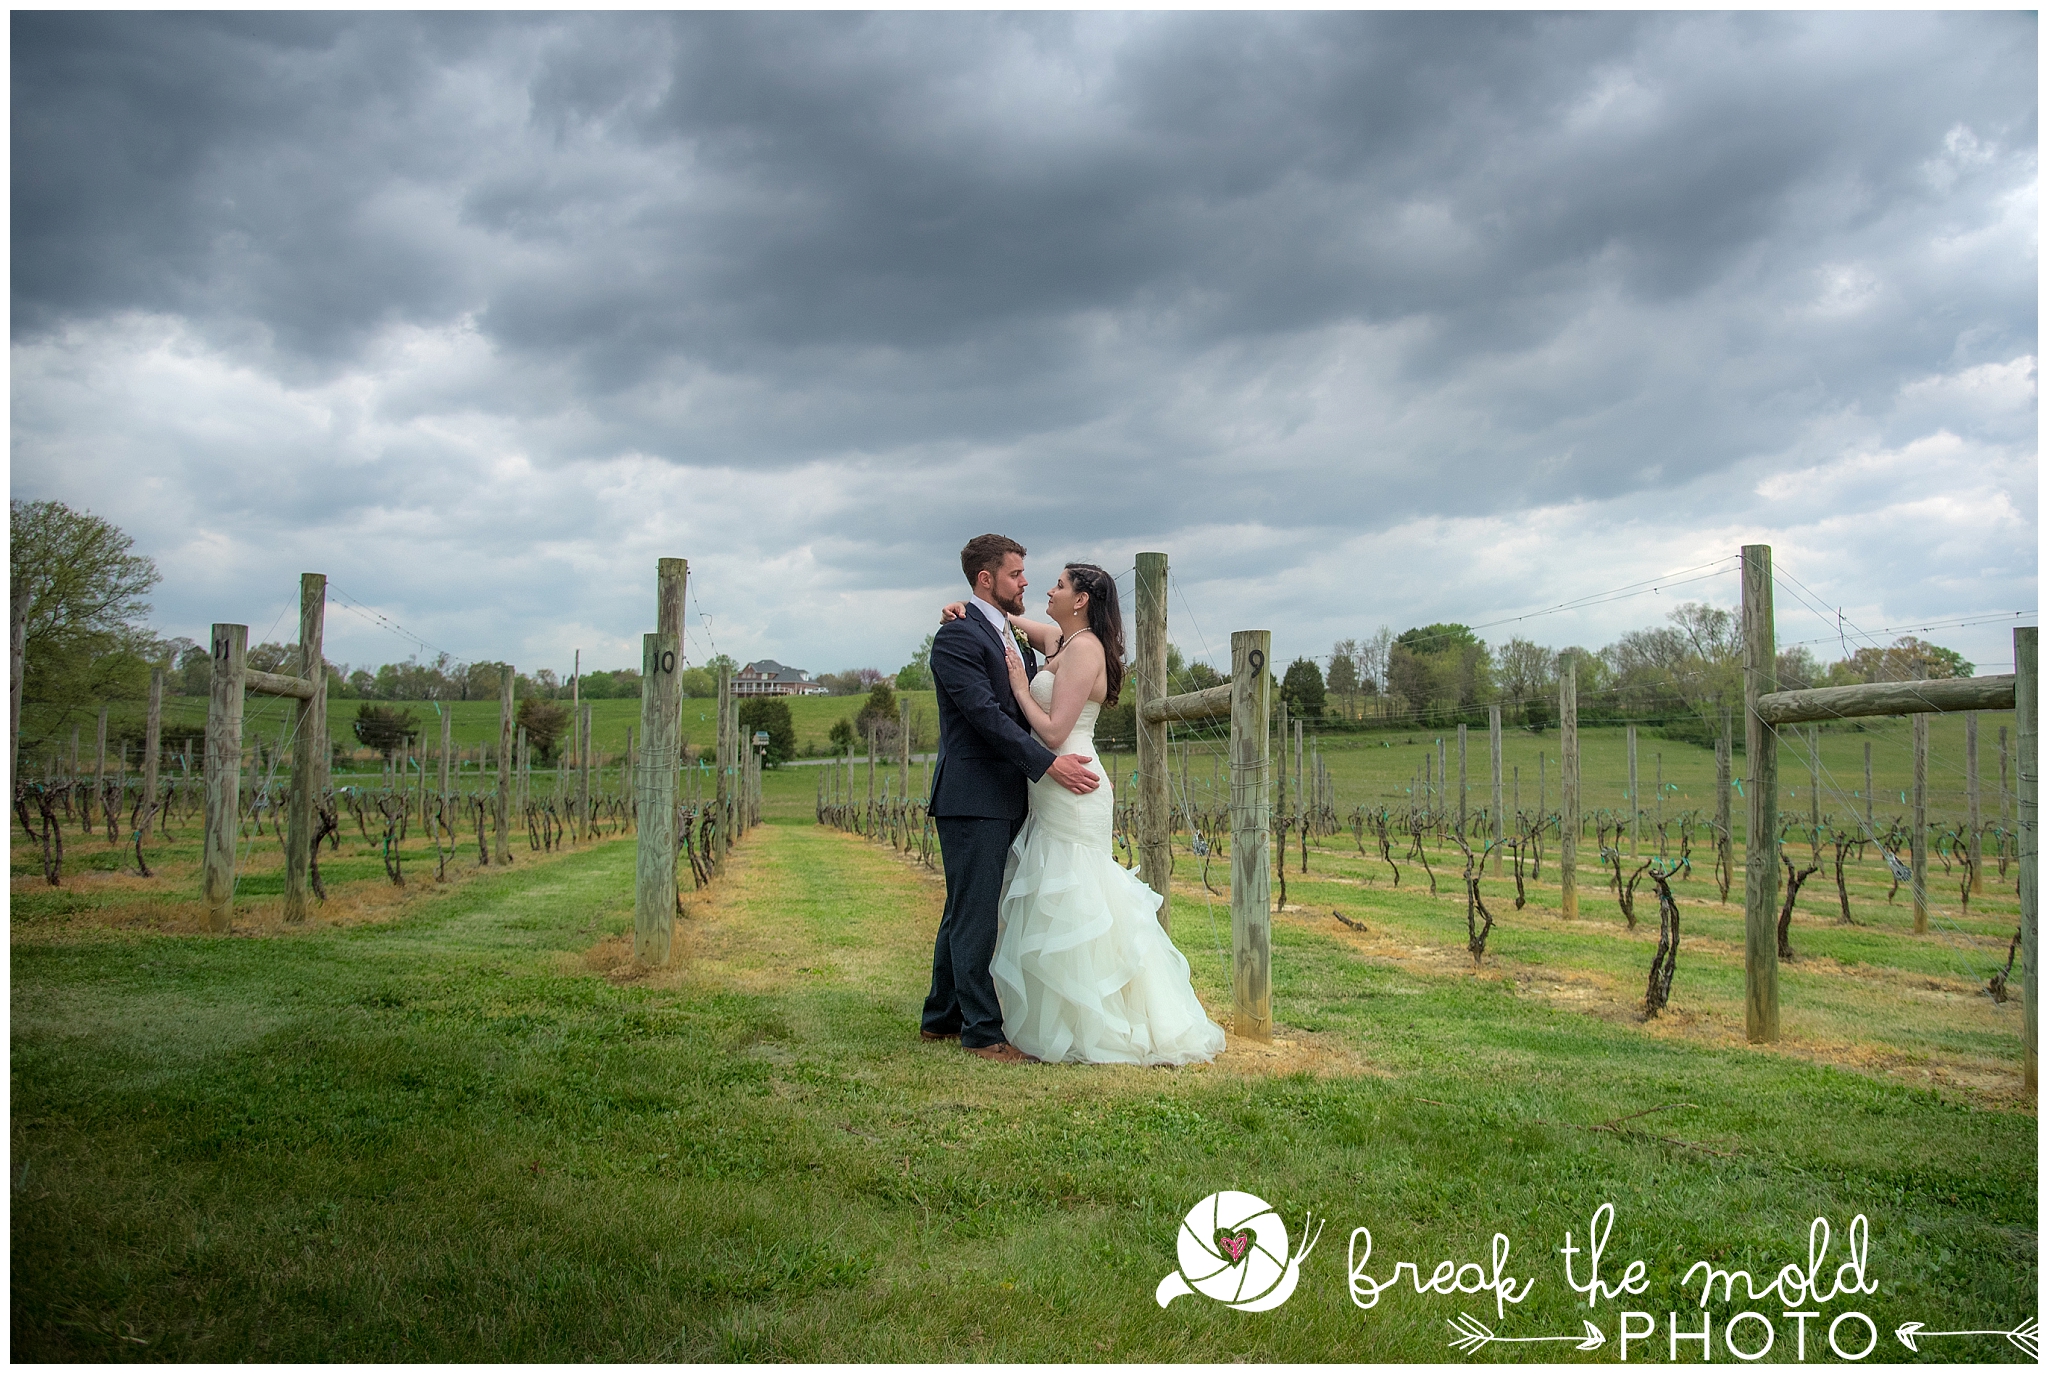 wedding-maryville-vineyard-pleasant-hill-vineyards-wine-break-the-mold-photo-unique-affordable-photography-knoxville_0298.jpg